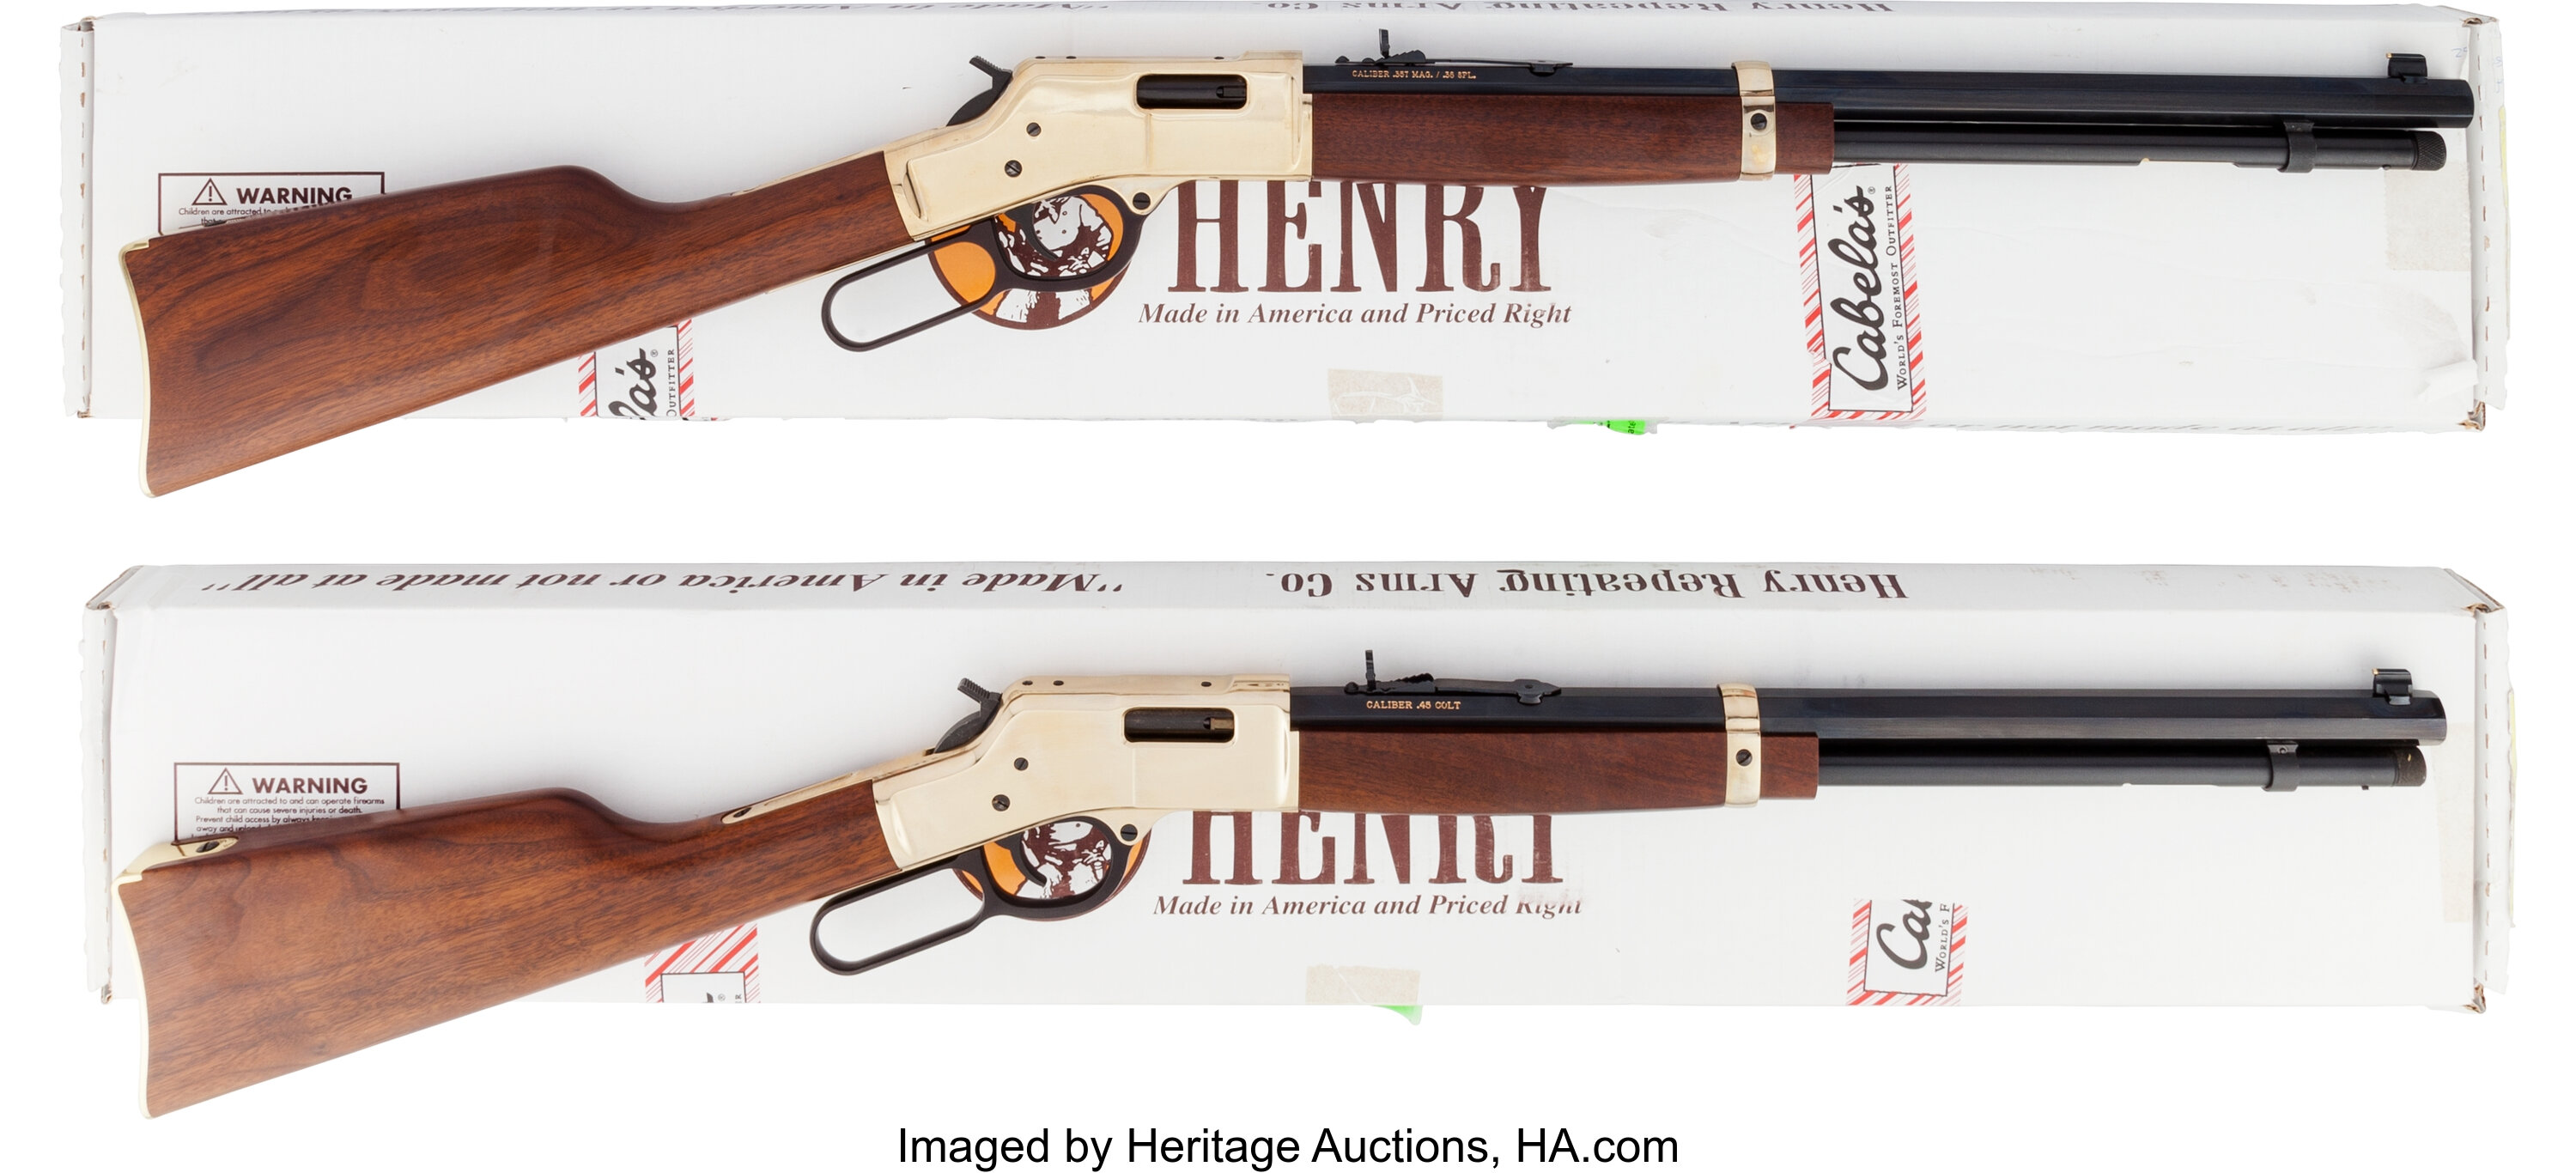 Henry repeating rifle serial numbers chart